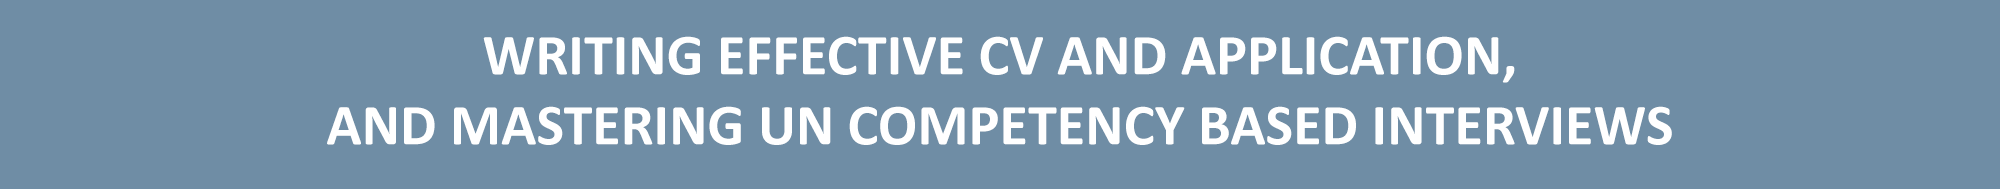 Writing effective CV and application, and mastering UN Competency based interviews